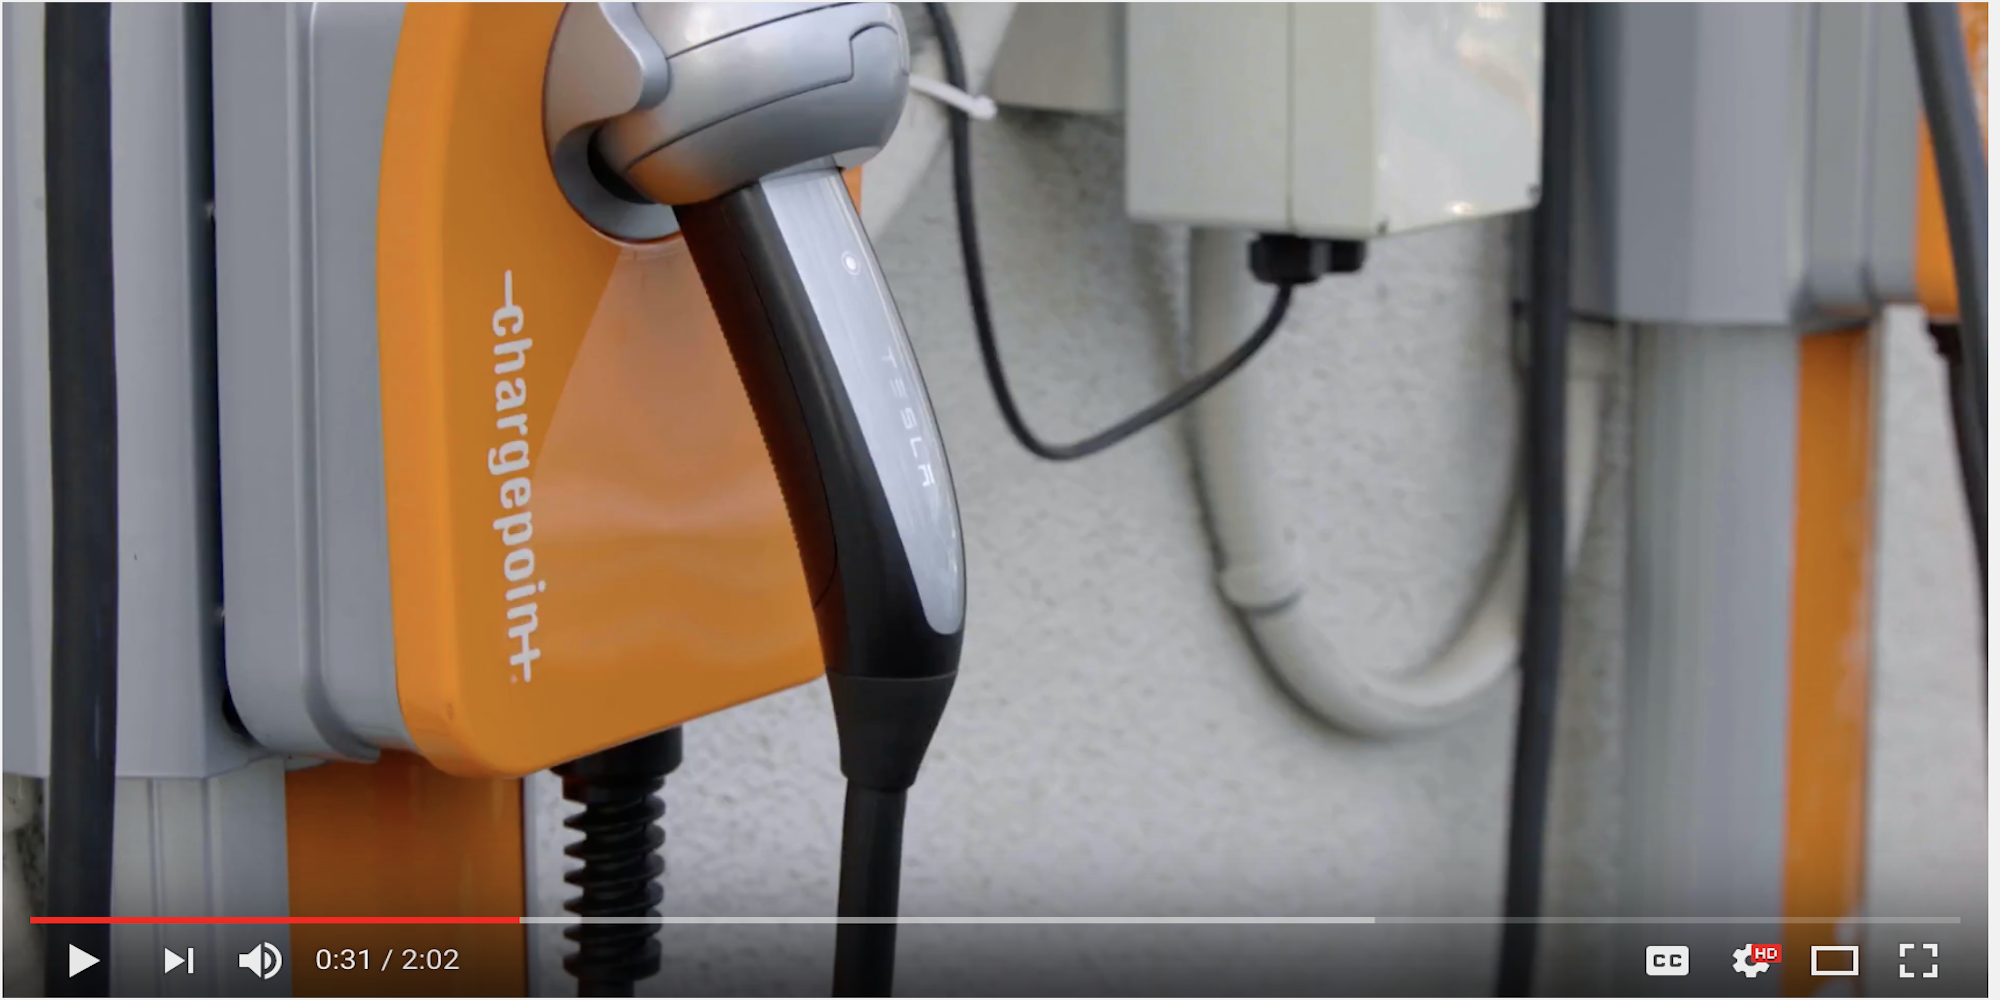 chargepoint-mysteriously-shows-a-tesla-handle-in-their-own-charger-in